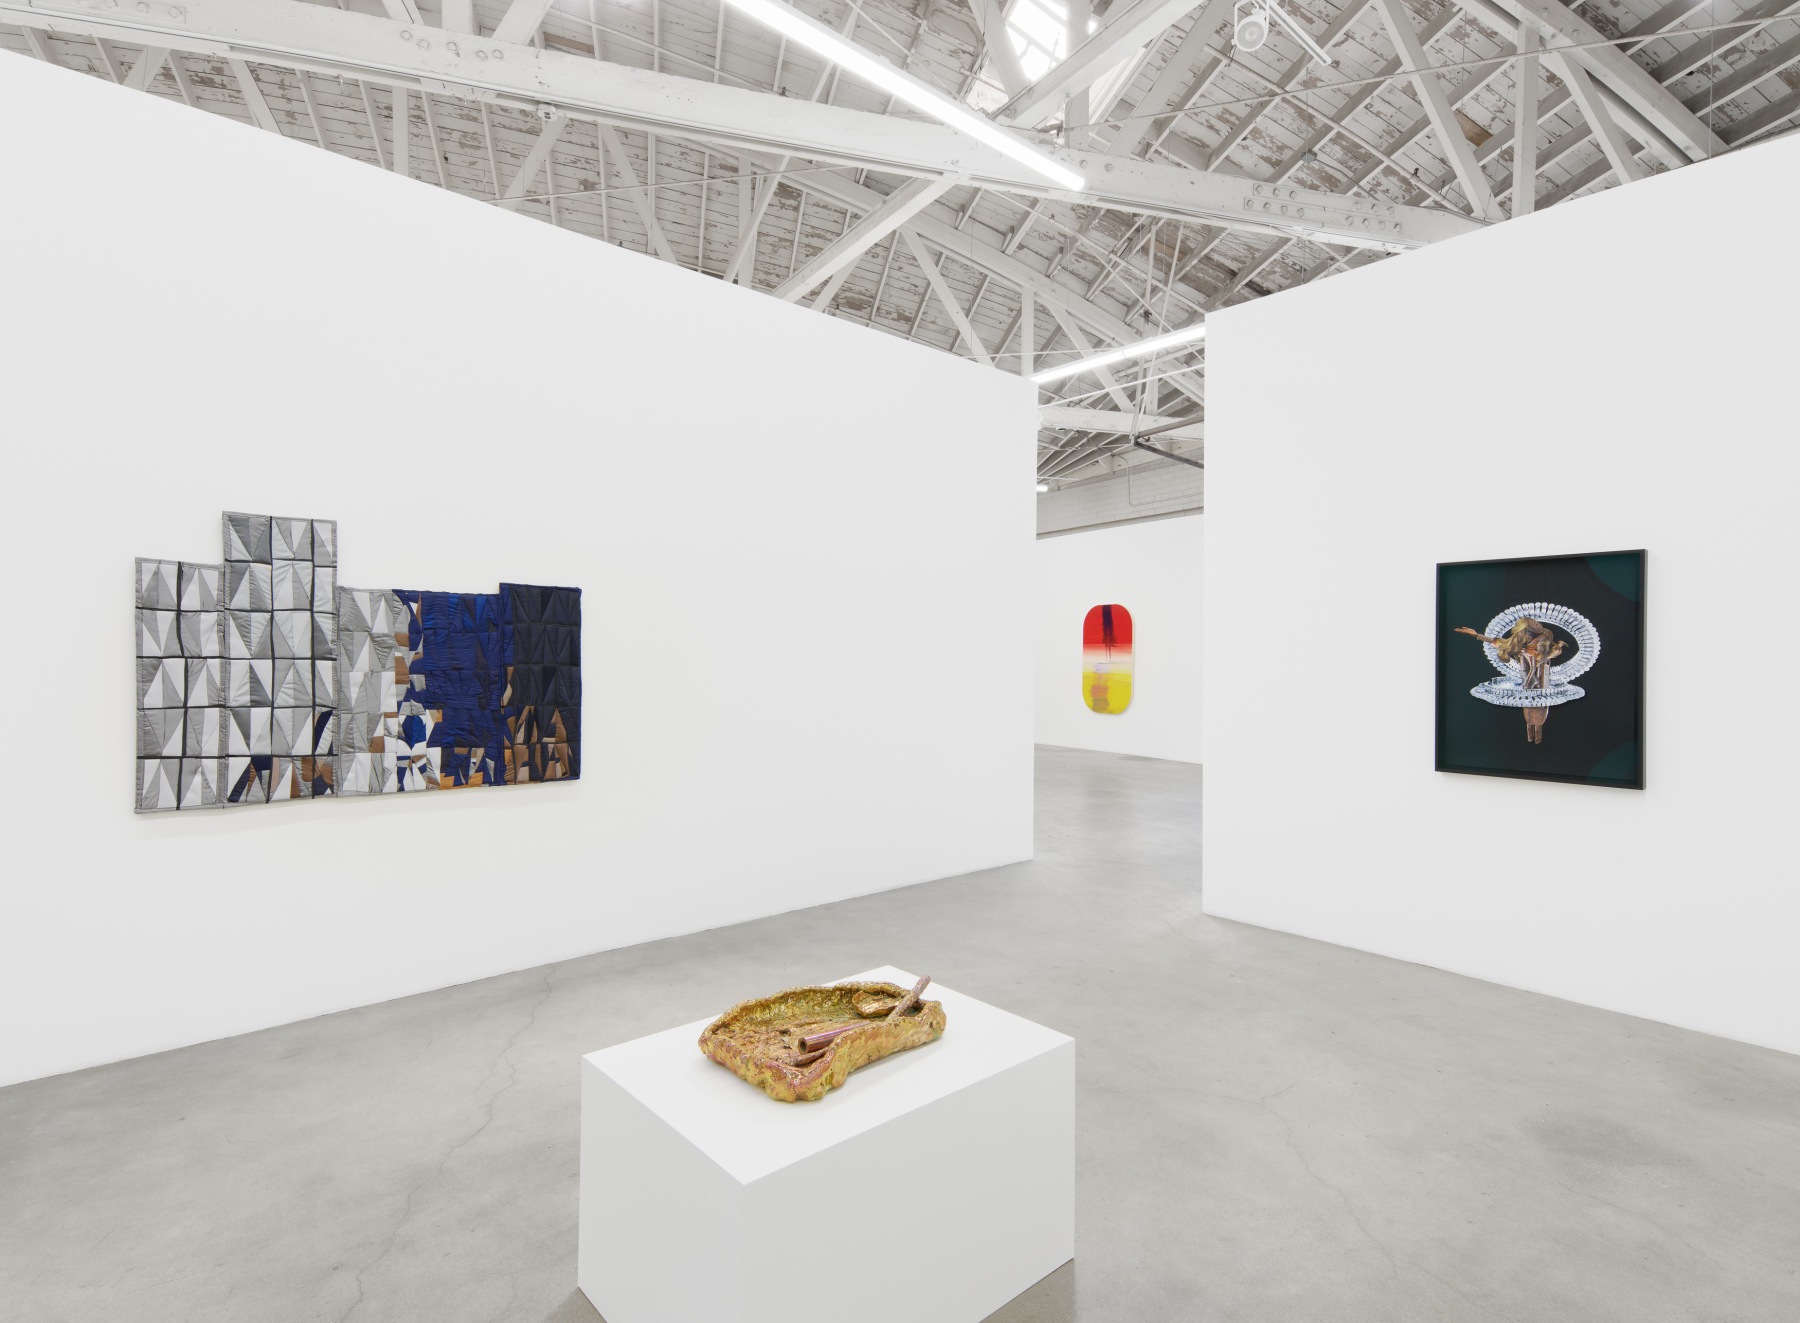 Installation view of Majeure Force, Part Two, featuring works by Anne Libby, Sterling Ruby, Elaine Stocki, and Rashaad Newsome.